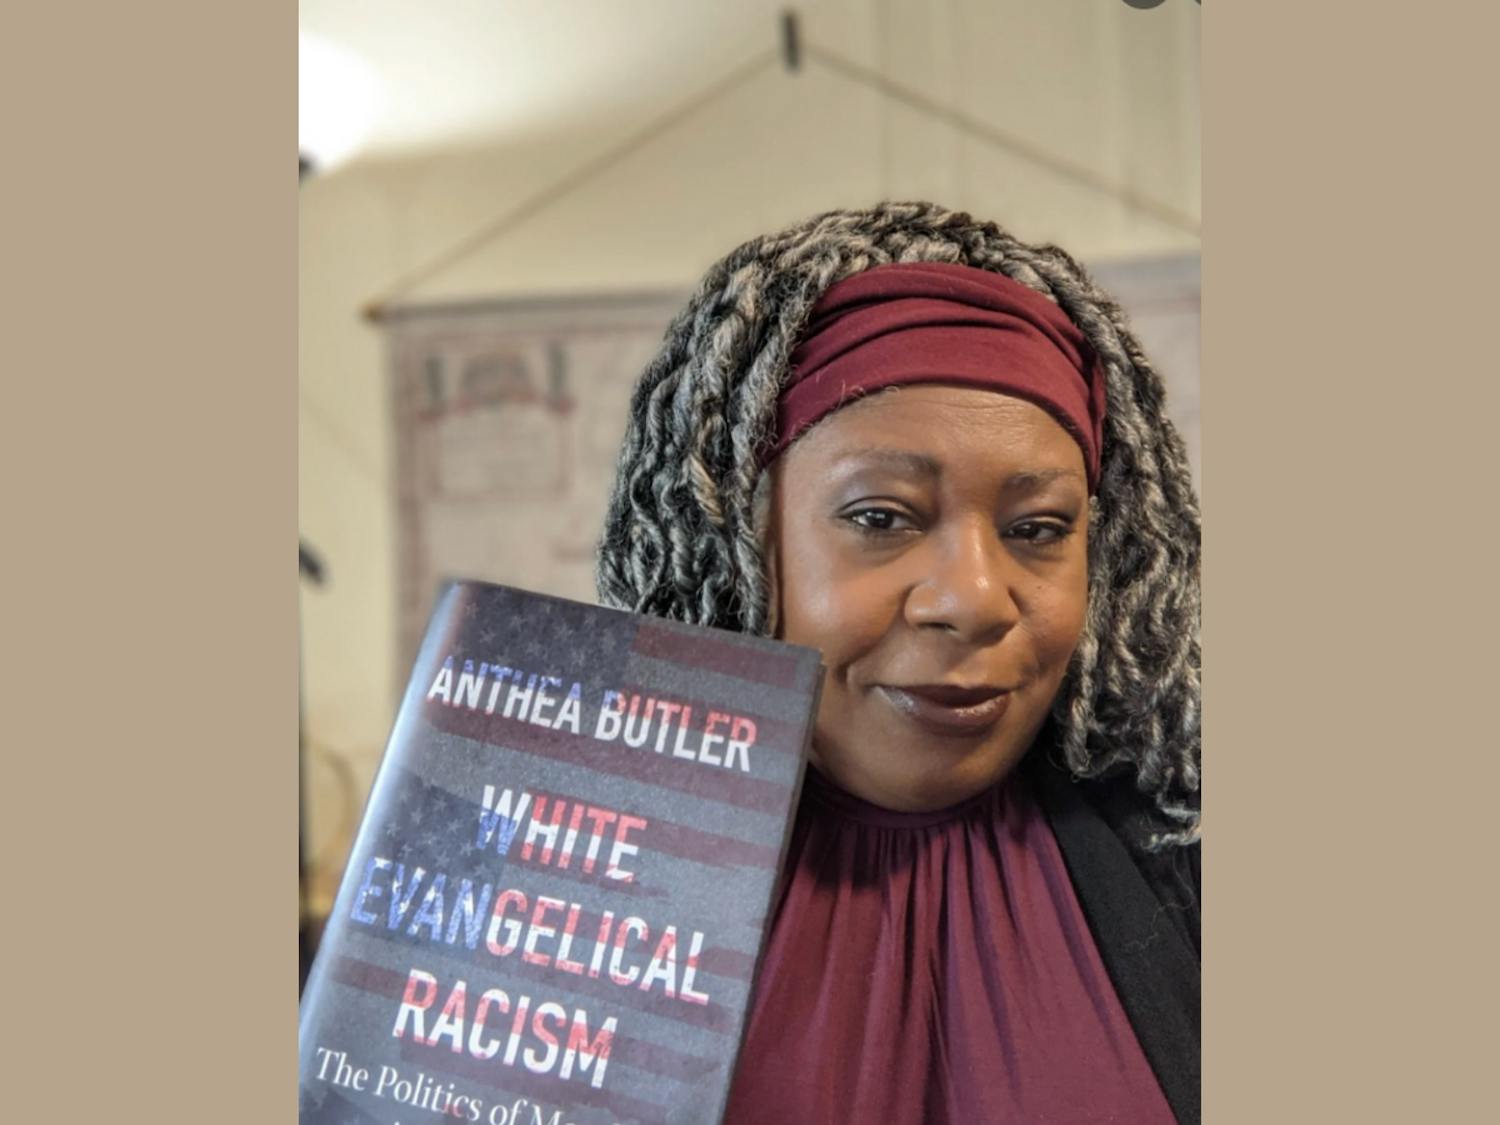 Anthea Butler with her book, “White Evangelical Racism: The Politics of Morality in America.”